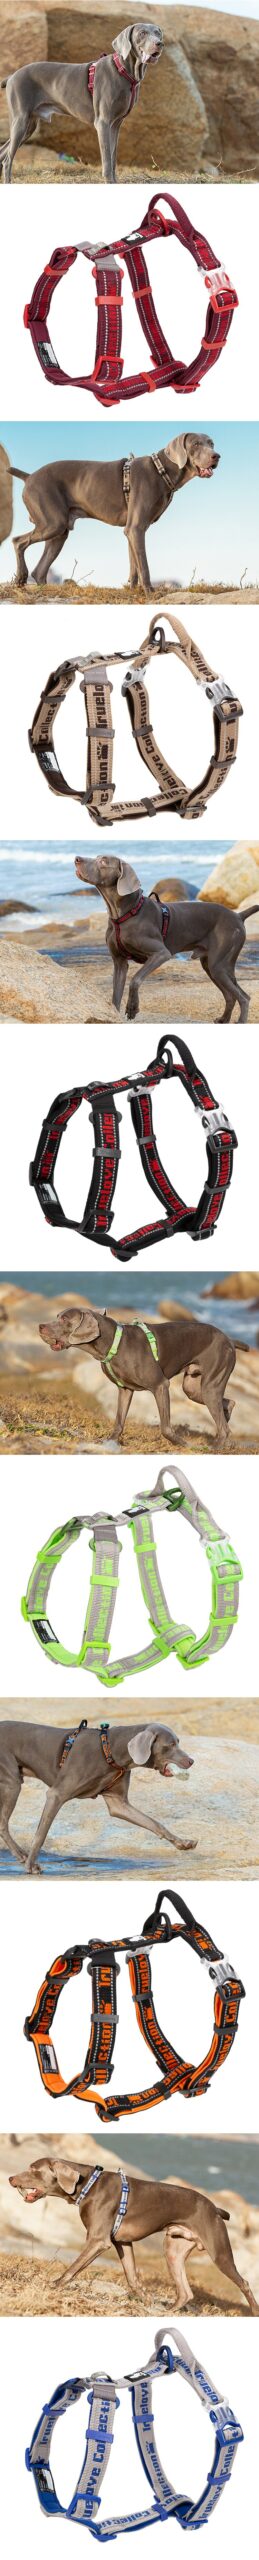 Winhyepet Dog Harness Adjustable Reflective Vest Pet Accessories All Weather Dog Traveling Harness For Small Meduim Large Dogs